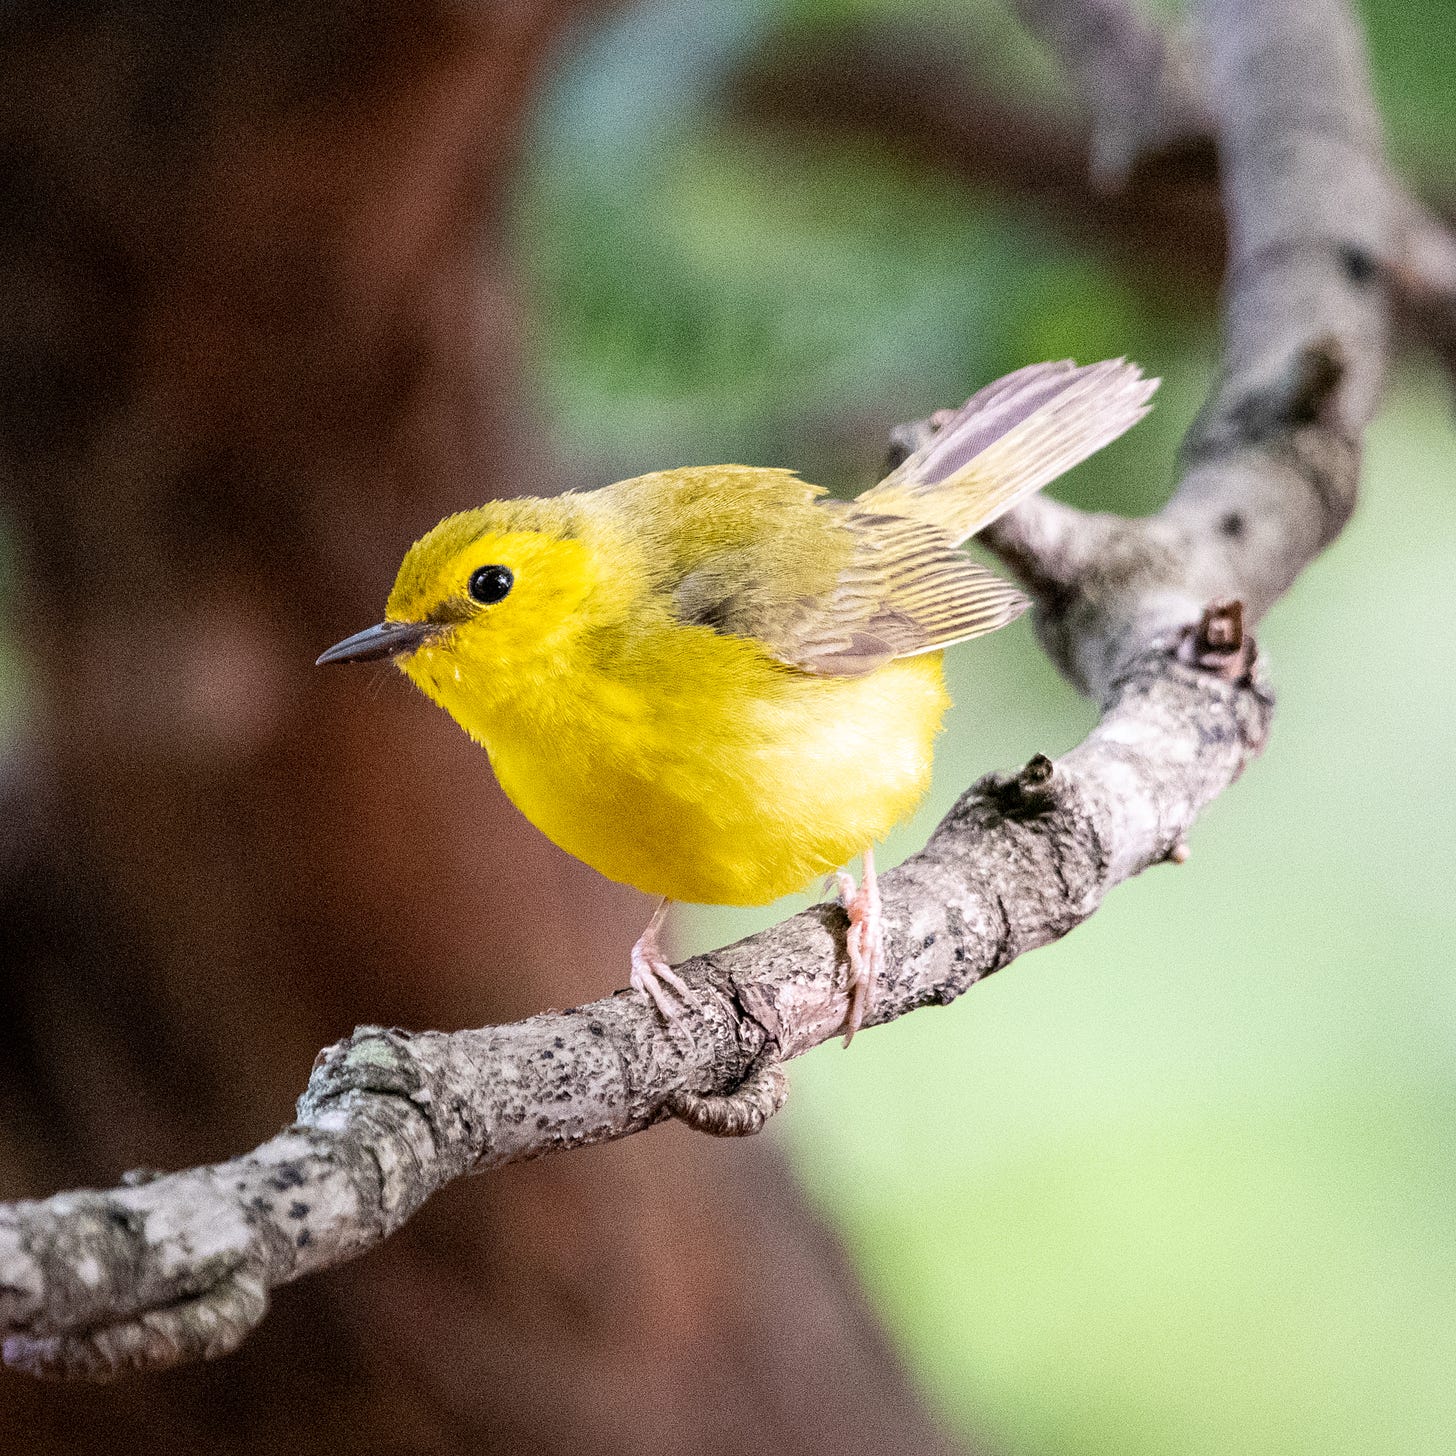 A hooded warbler (female), head cocked, perched on a yew branch